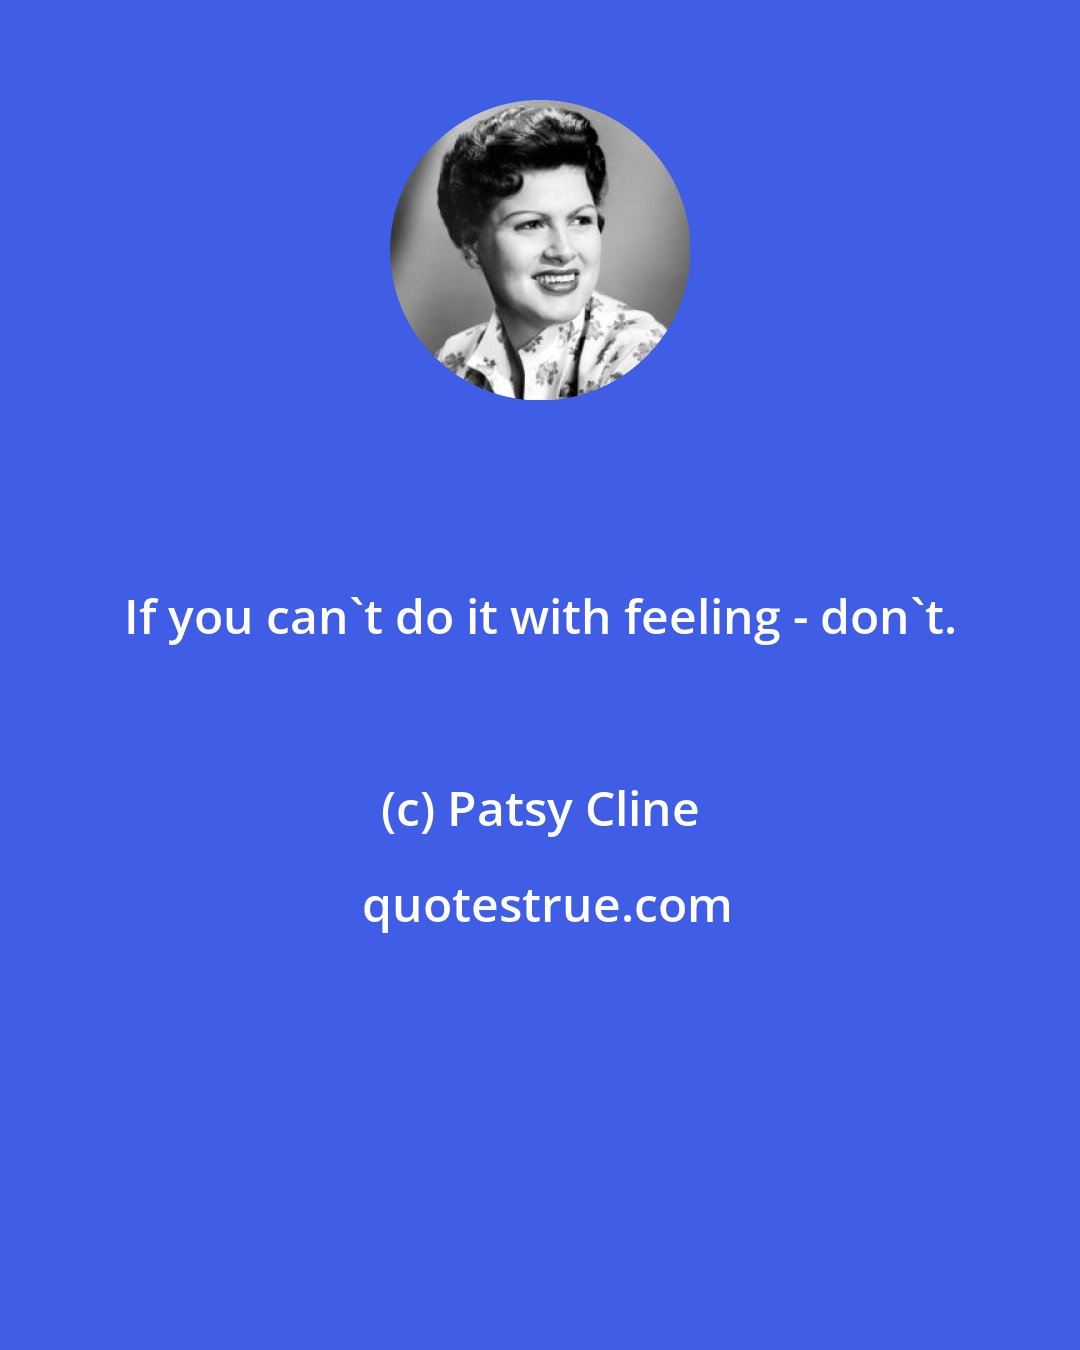 Patsy Cline: If you can't do it with feeling - don't.